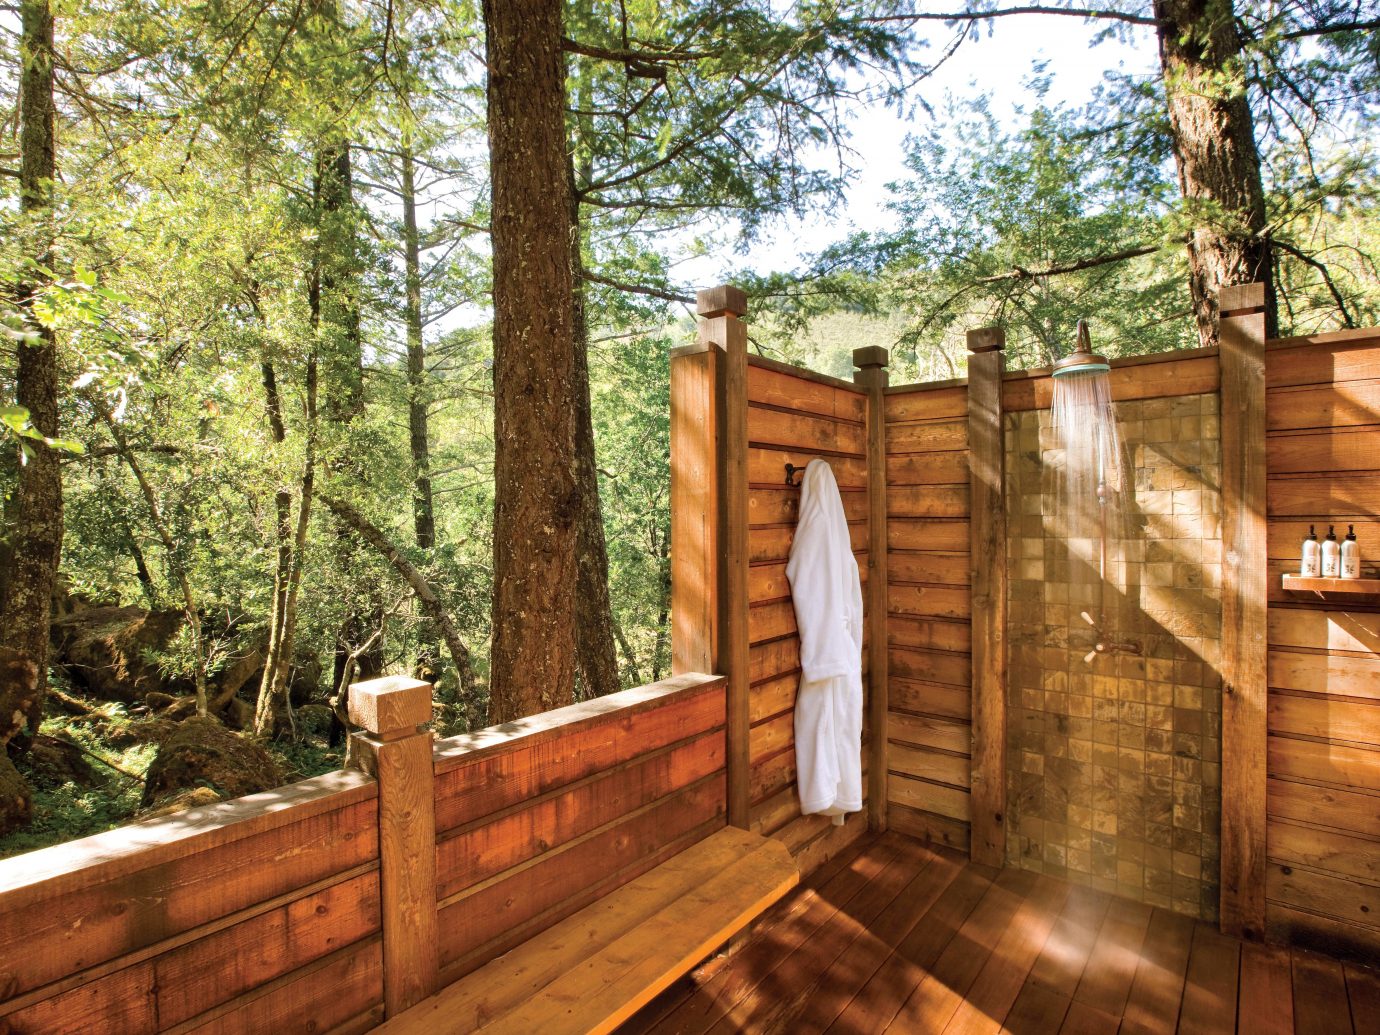 Bath Eco Health + Wellness Hotels Luxury Outdoors Ranch Romance Romantic Rustic Spa Retreats Wellness tree property wood estate backyard home wooden log cabin outdoor structure cottage real estate wooded